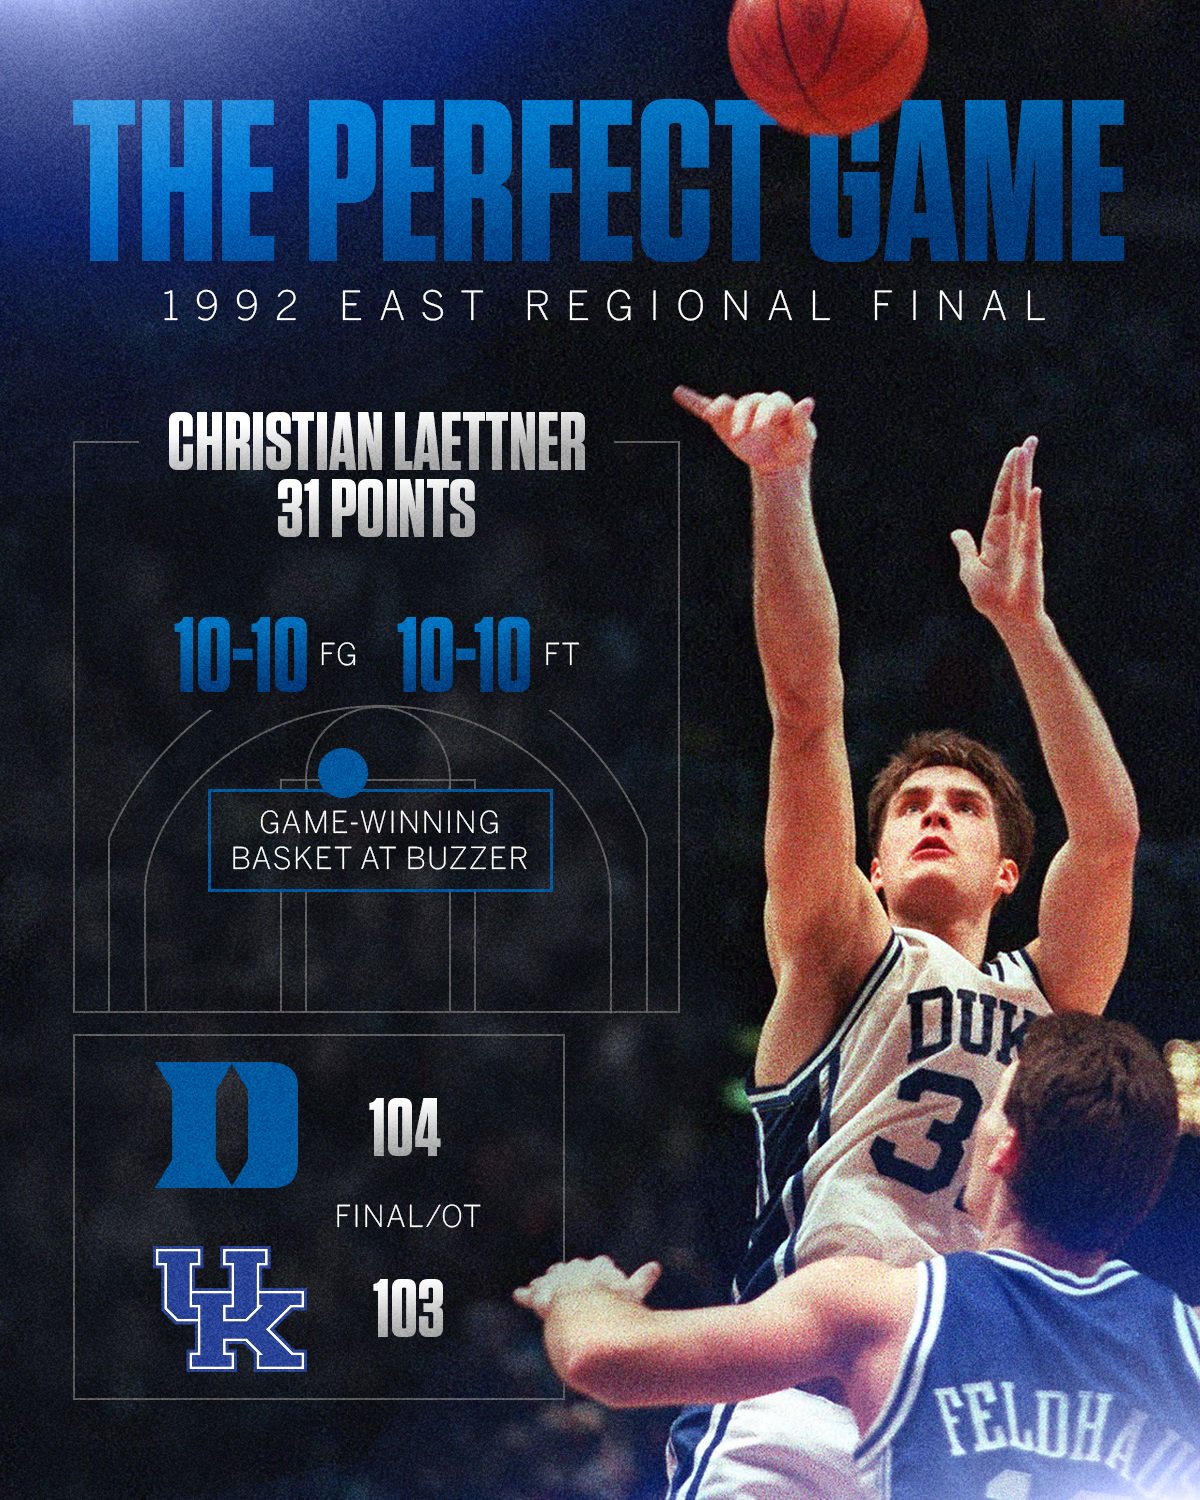 It's been a good week for Christian Laettner - Page 2 - ESPN